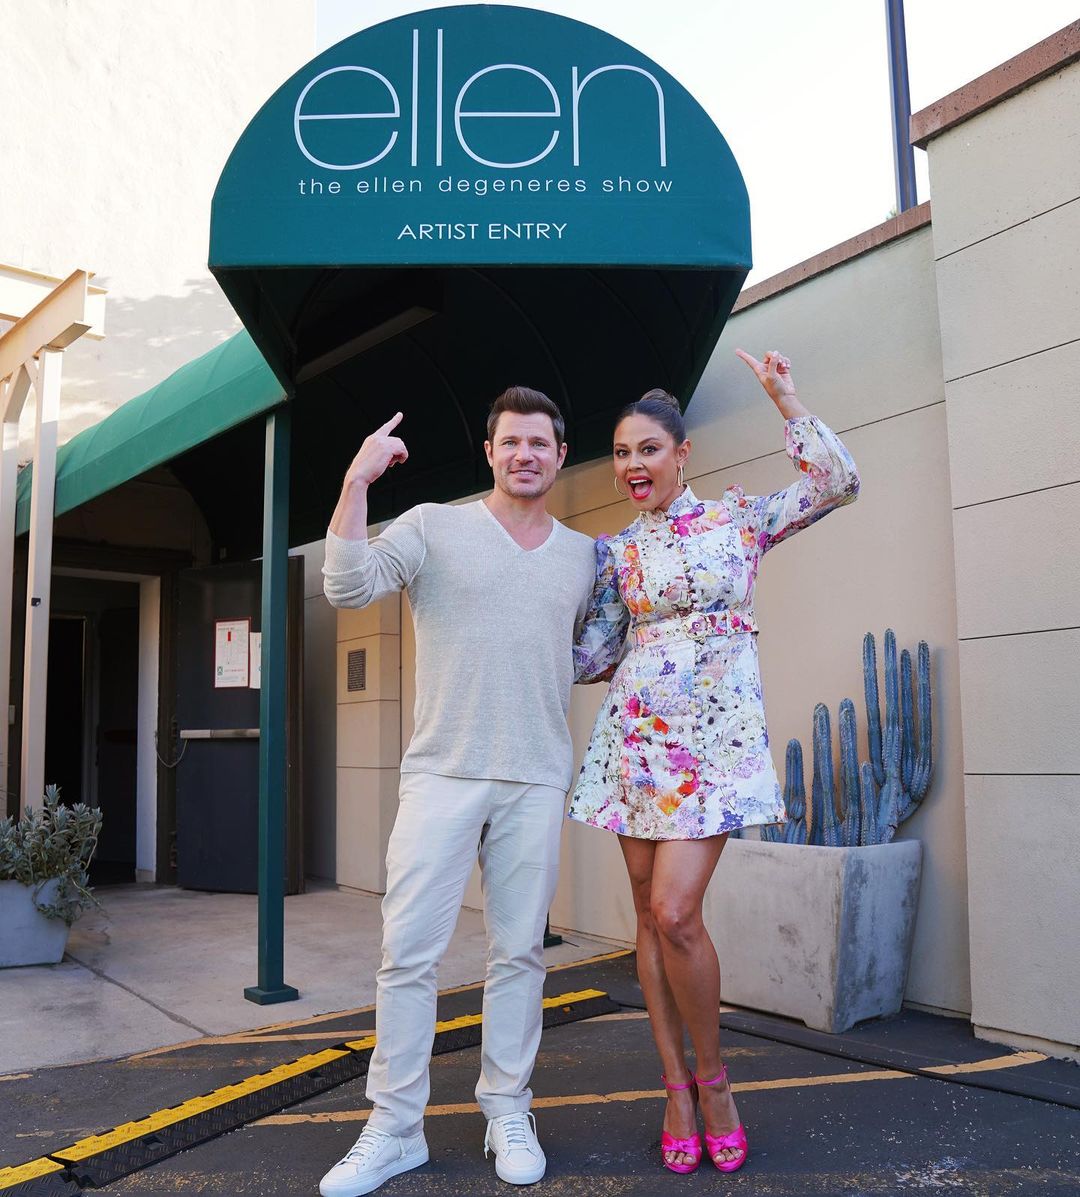 Both Nick Lachey and his wife, Vanessa Lachey were guests at The Ellen Degeneres Show in April 2022